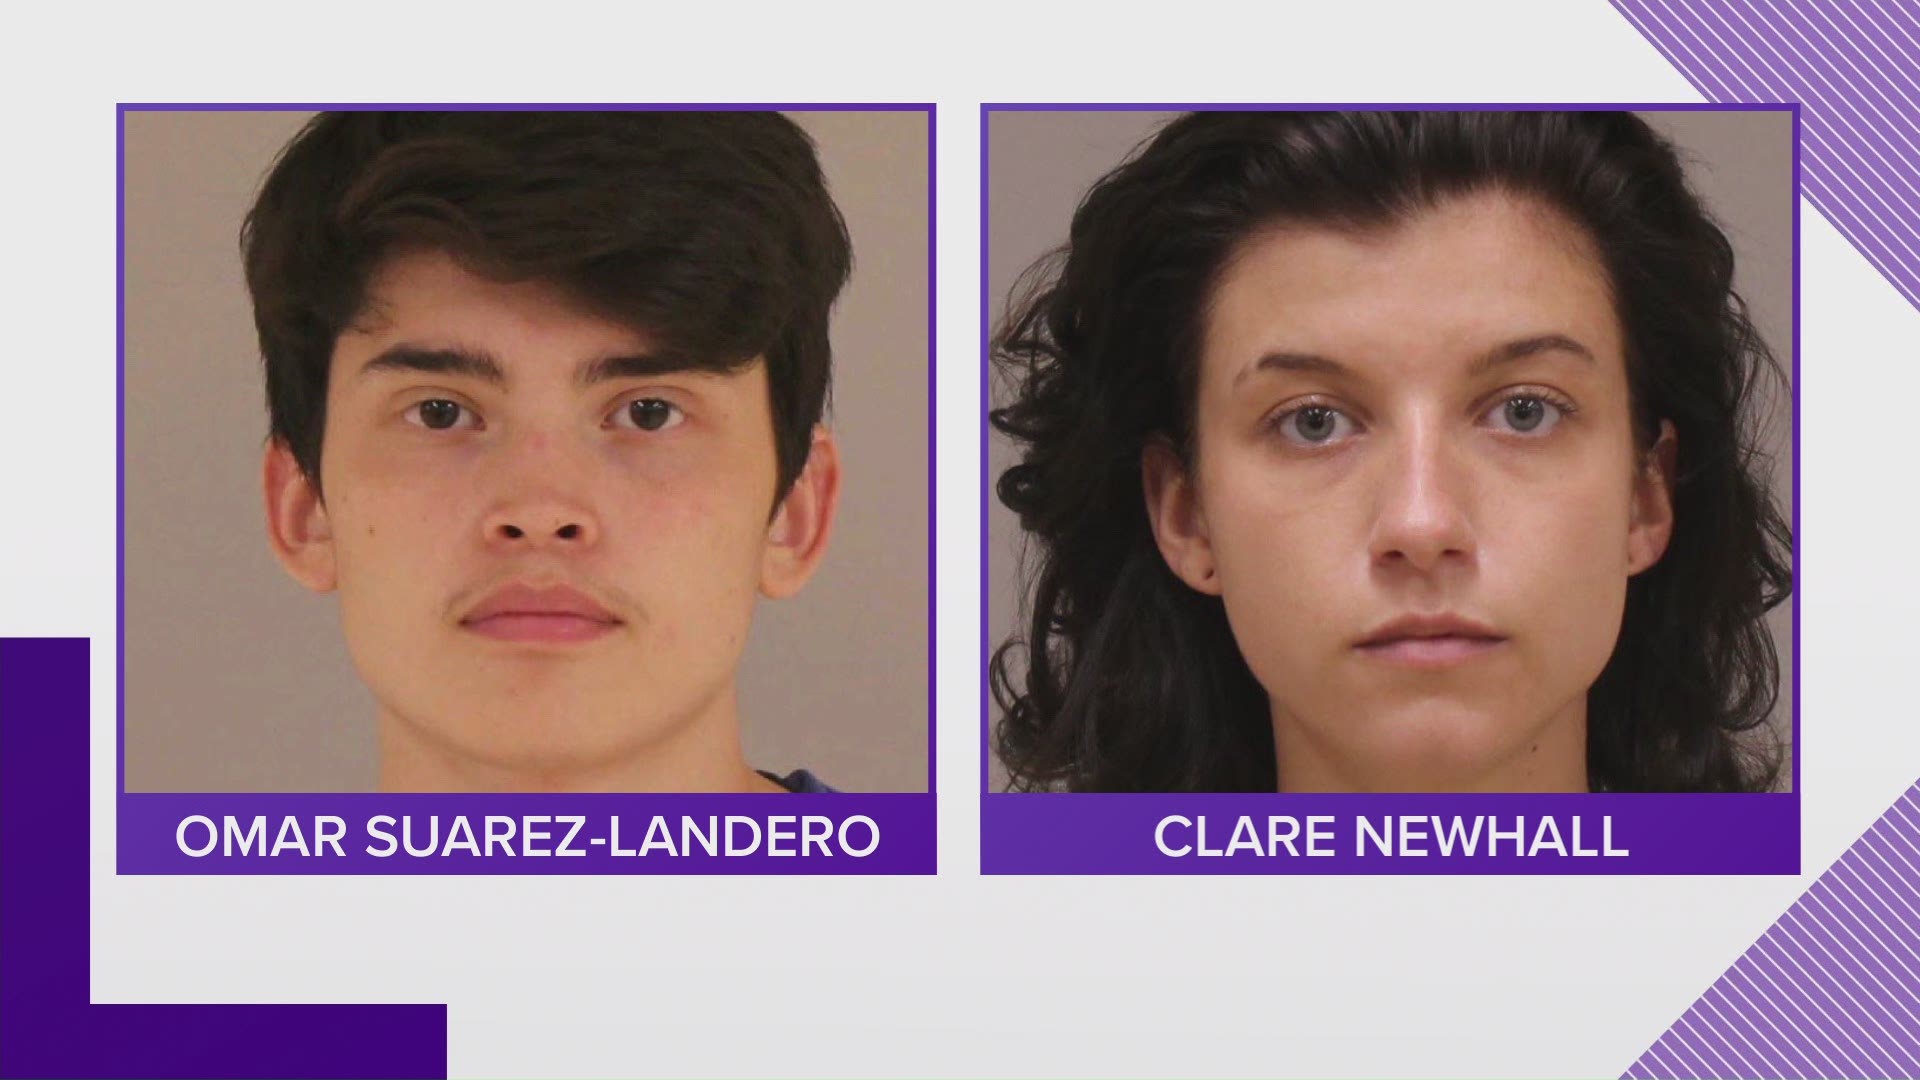 Omar Suarez-Landero is charged with riot and breaking into a restaurant; Clare Newhall is accused of riot and malicious destruction of a building.